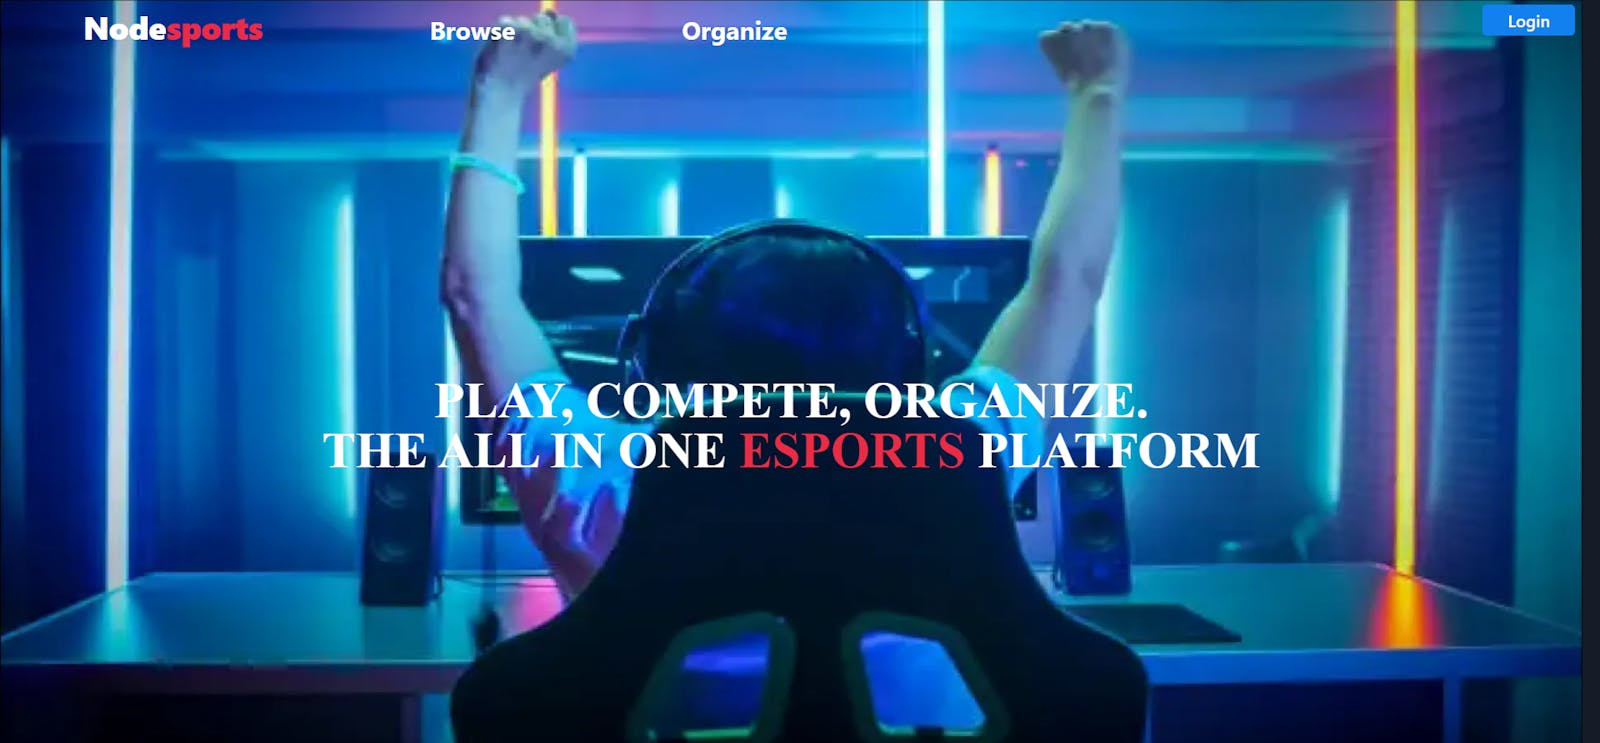 Nodesports - The all in one esports platform  🎮